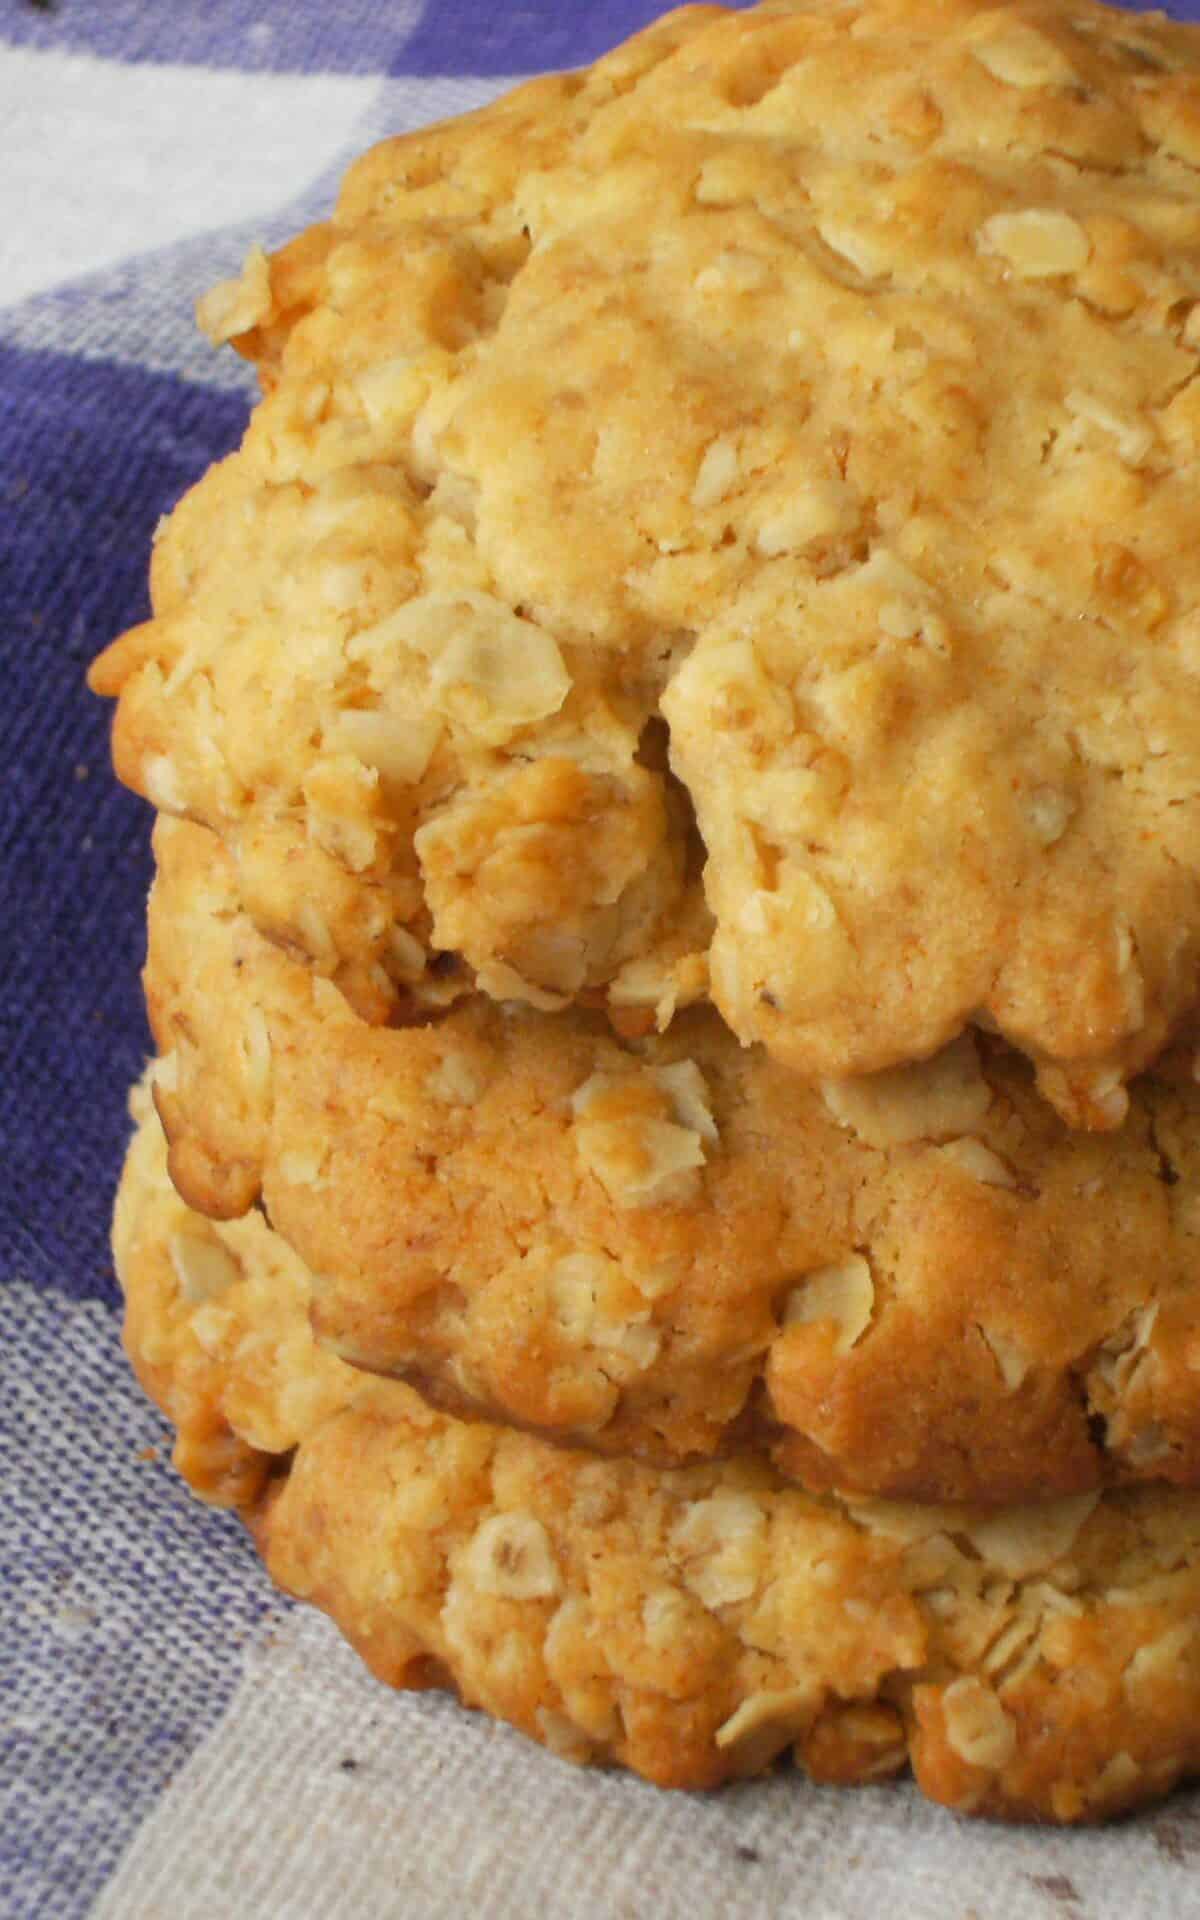  These oat cookies are the perfect sweet treat with your favorite hot drink.